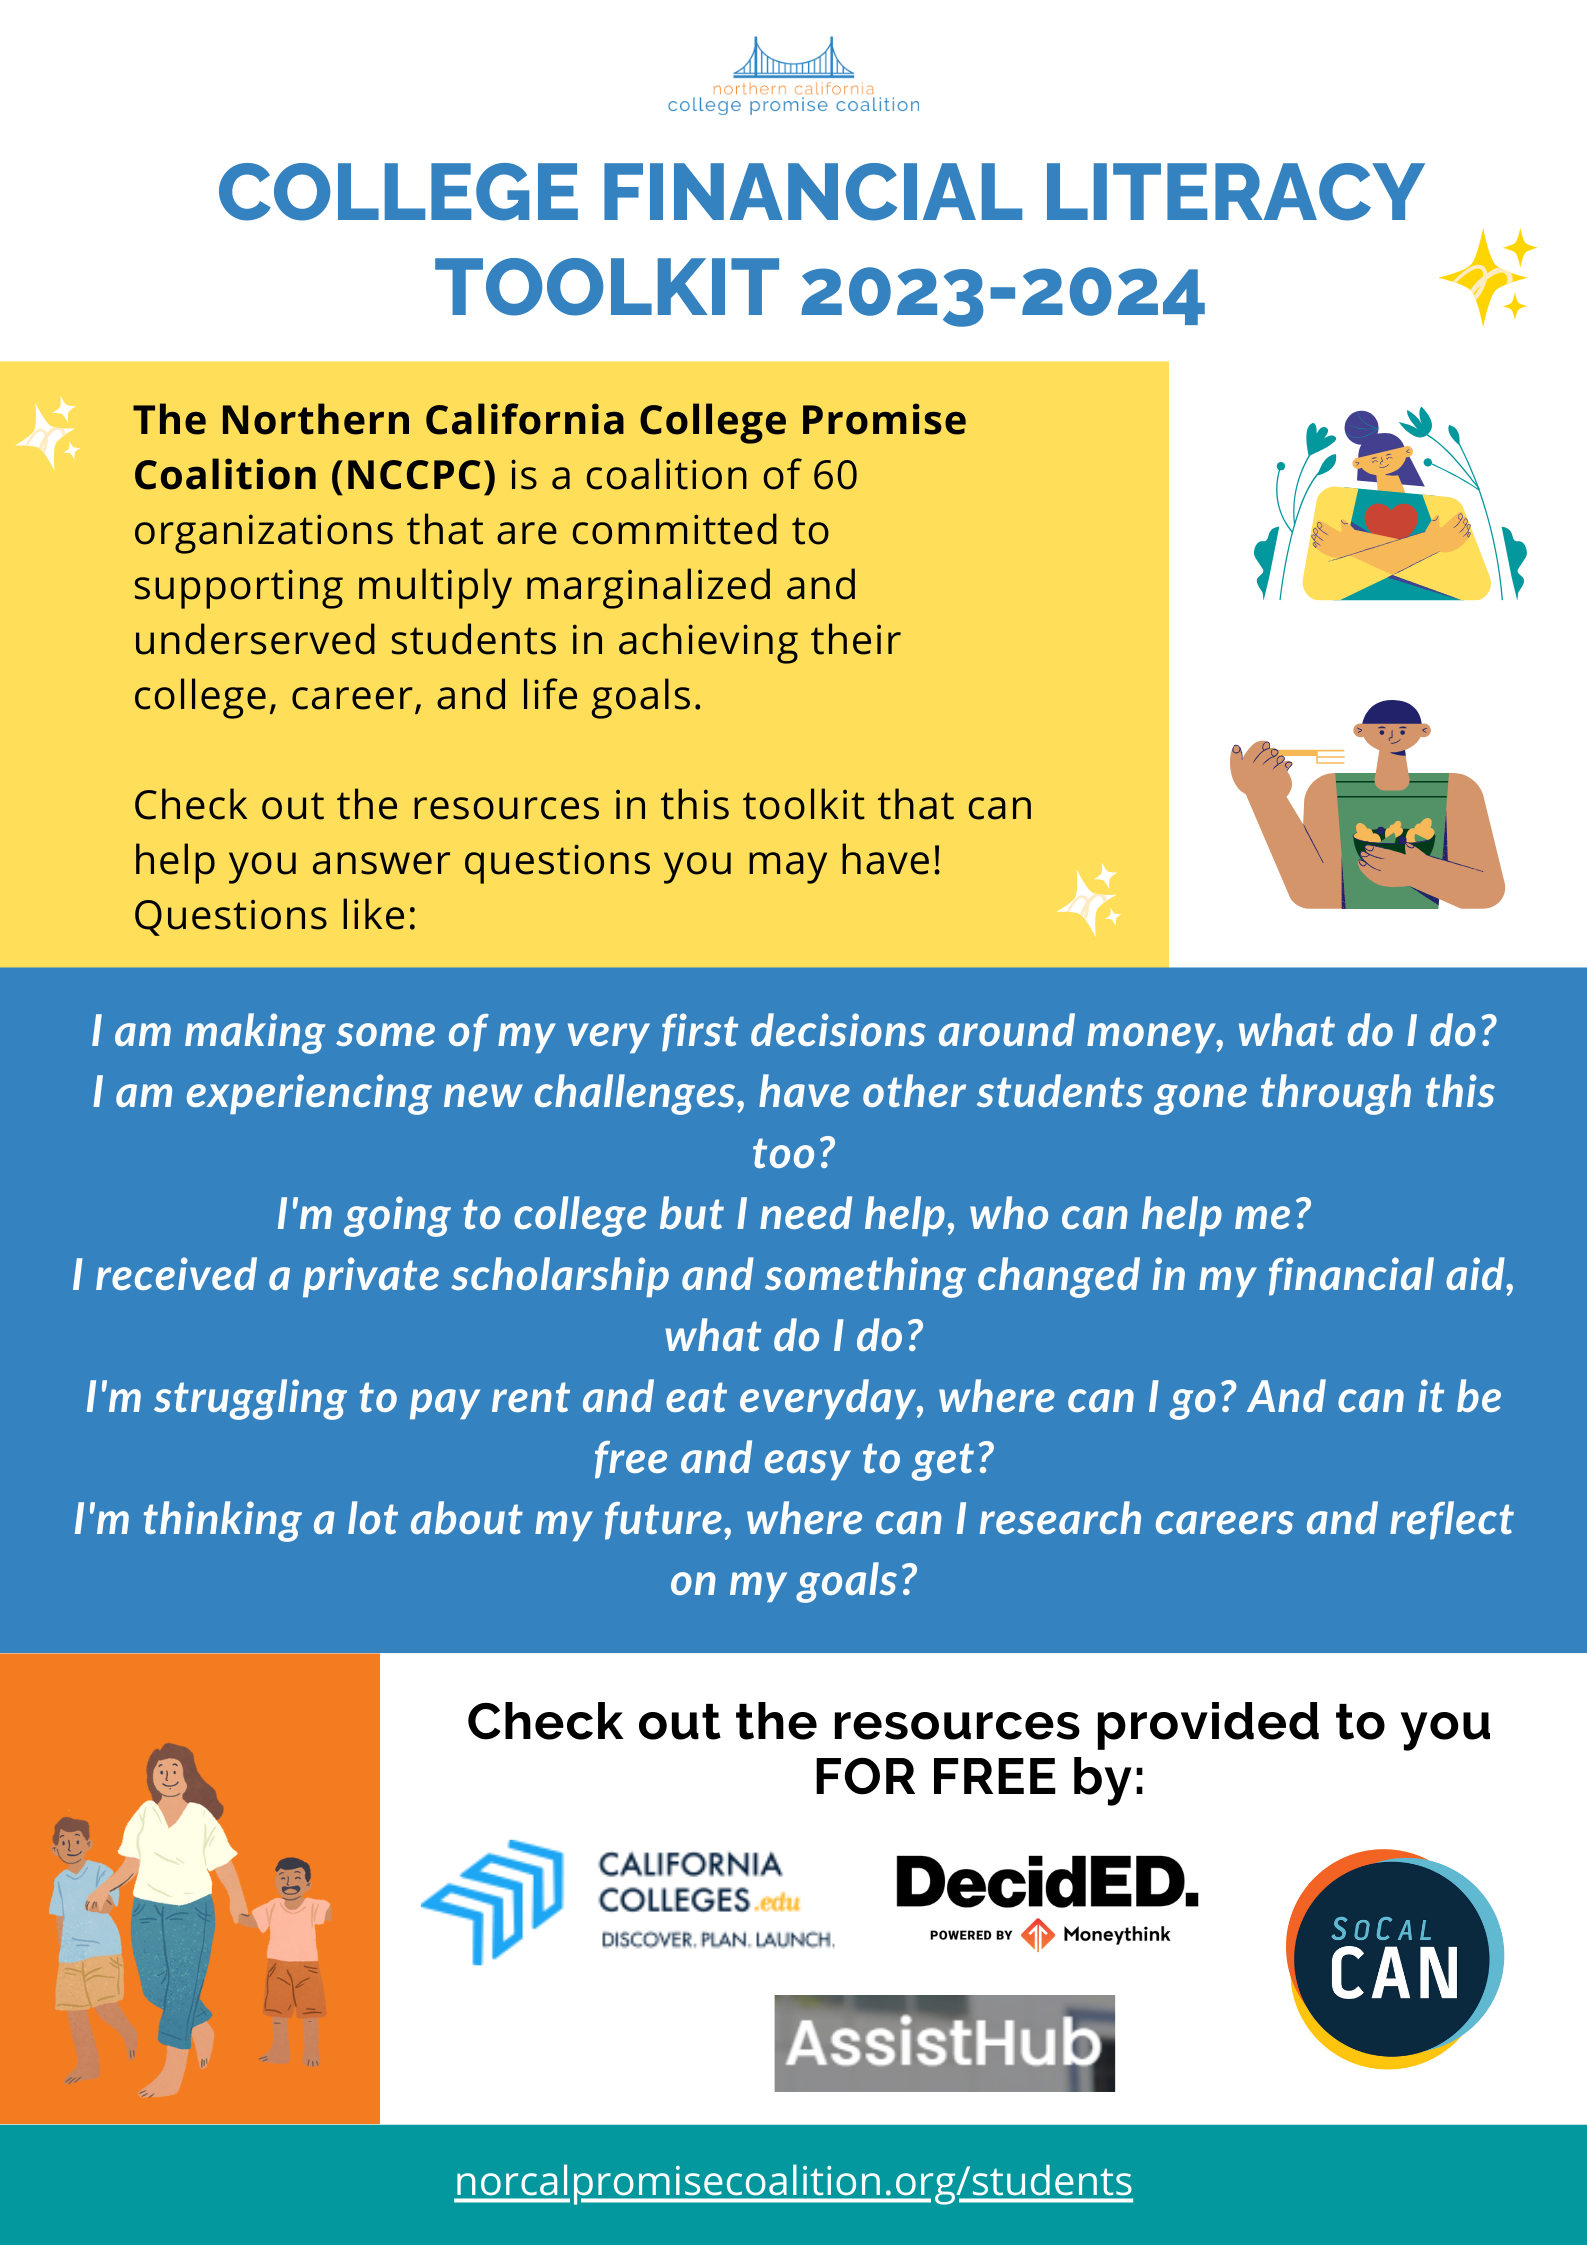 NCCPC's College Financial Literacy Toolkit 2023-2024 pg1